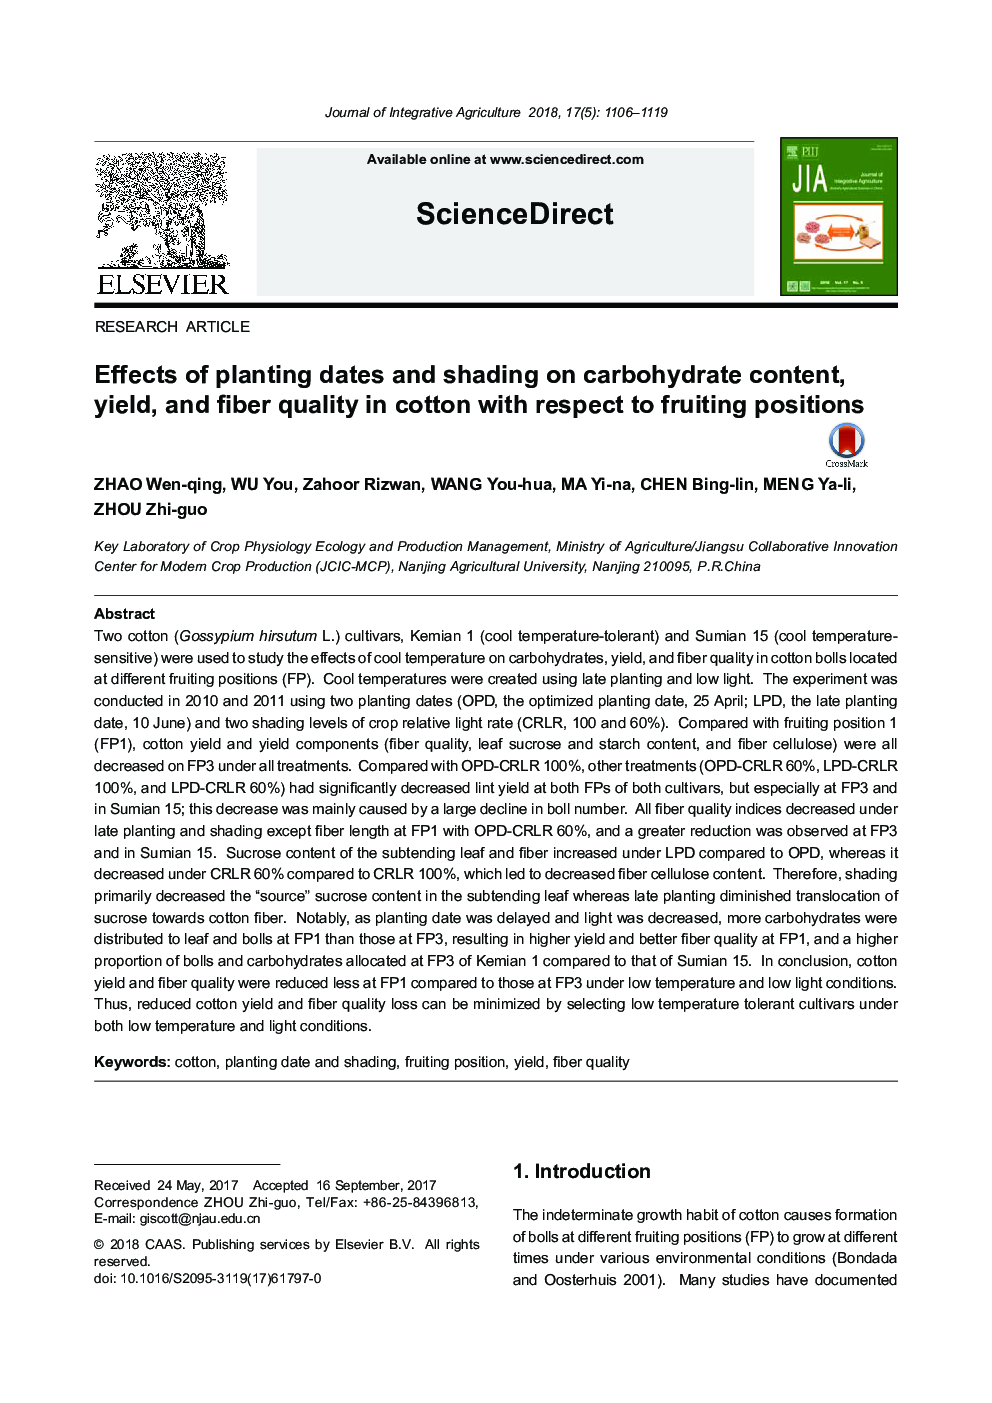 Effects of planting dates and shading on carbohydrate content, yield, and fiber quality in cotton with respect to fruiting positions